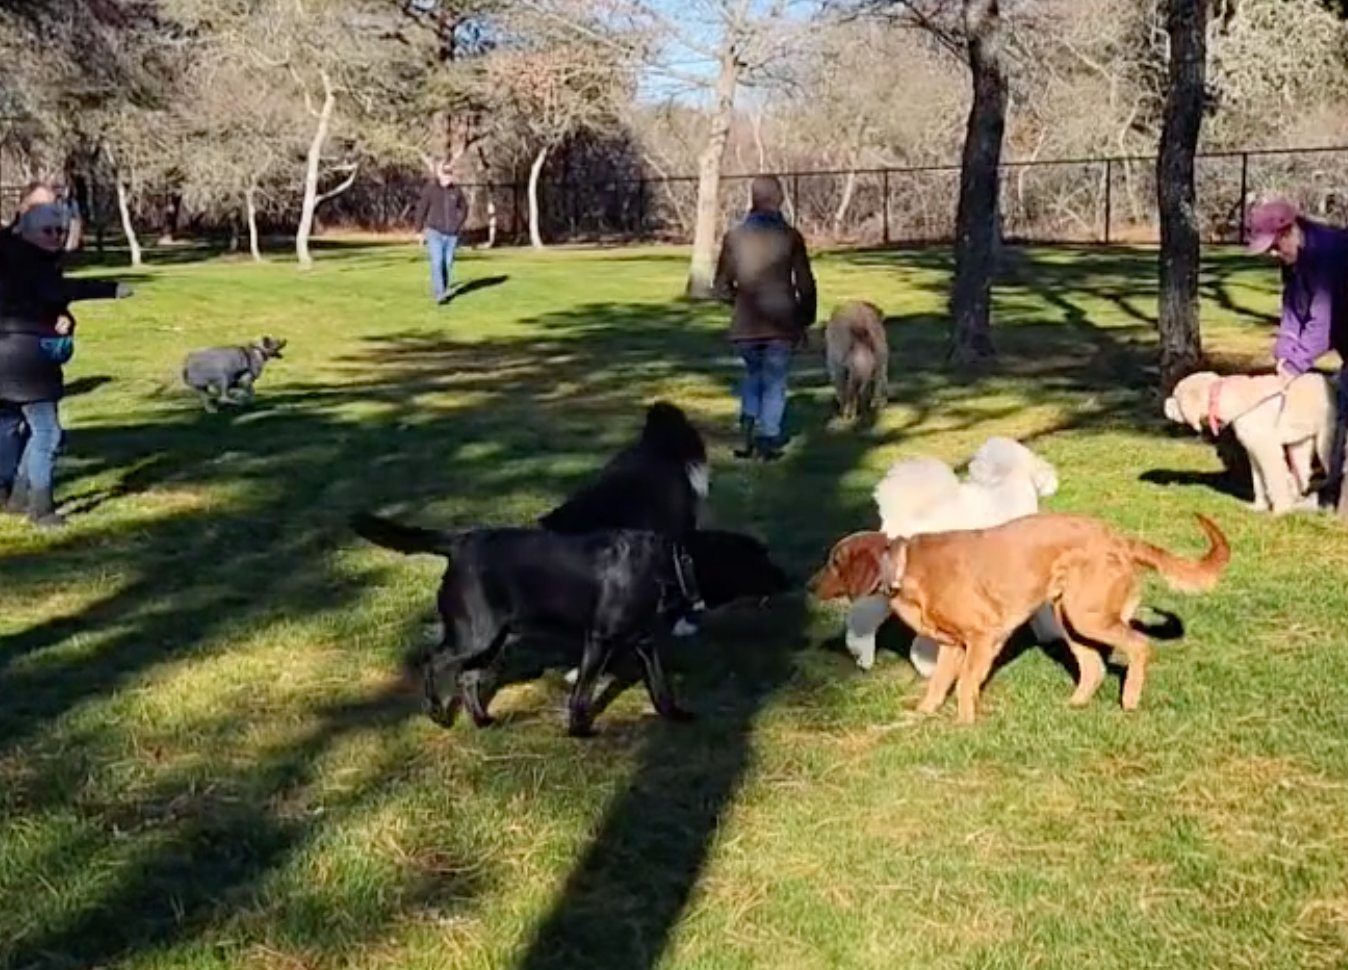 The Land Bank dog park at the corner of Surfside and Miacomet roads opened Sunday.